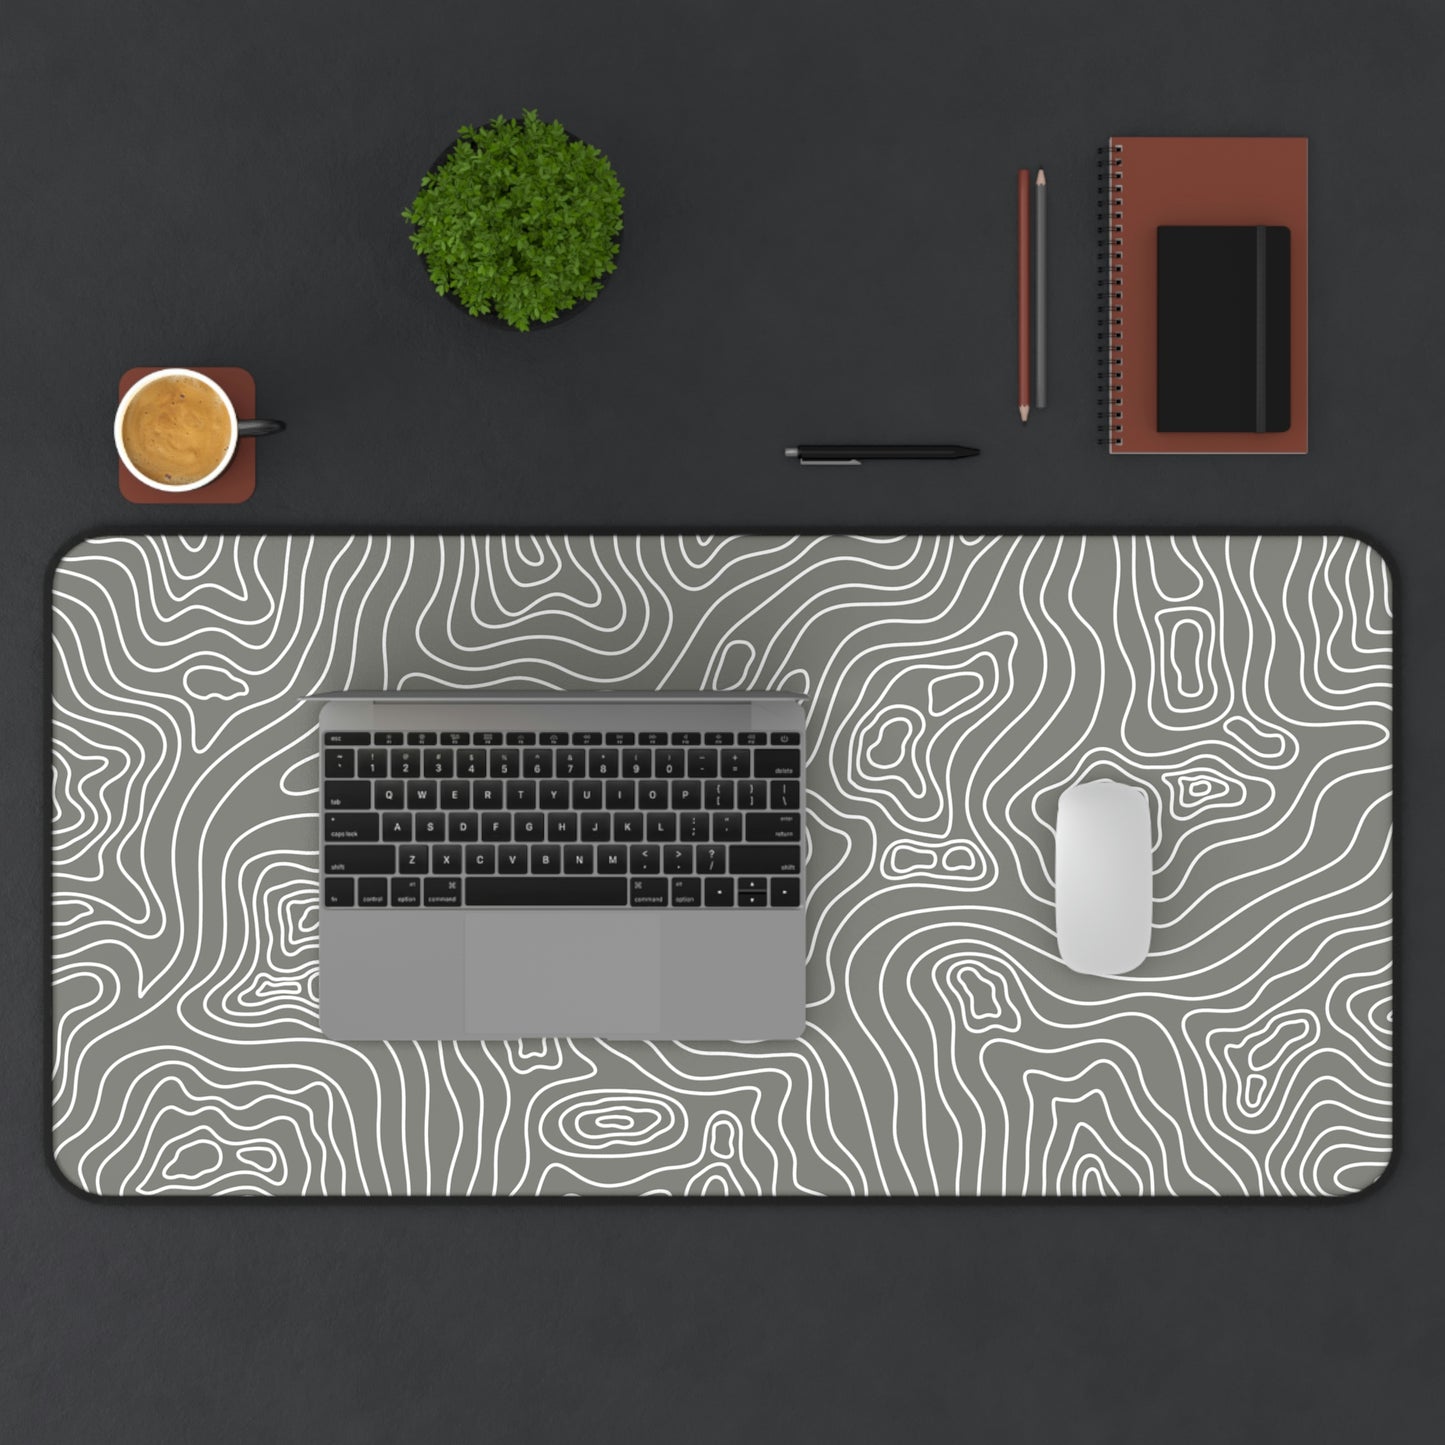 A 31" x 15.5" gray desk mat with white topographic lines. A laptop and mouse sit on top of it.